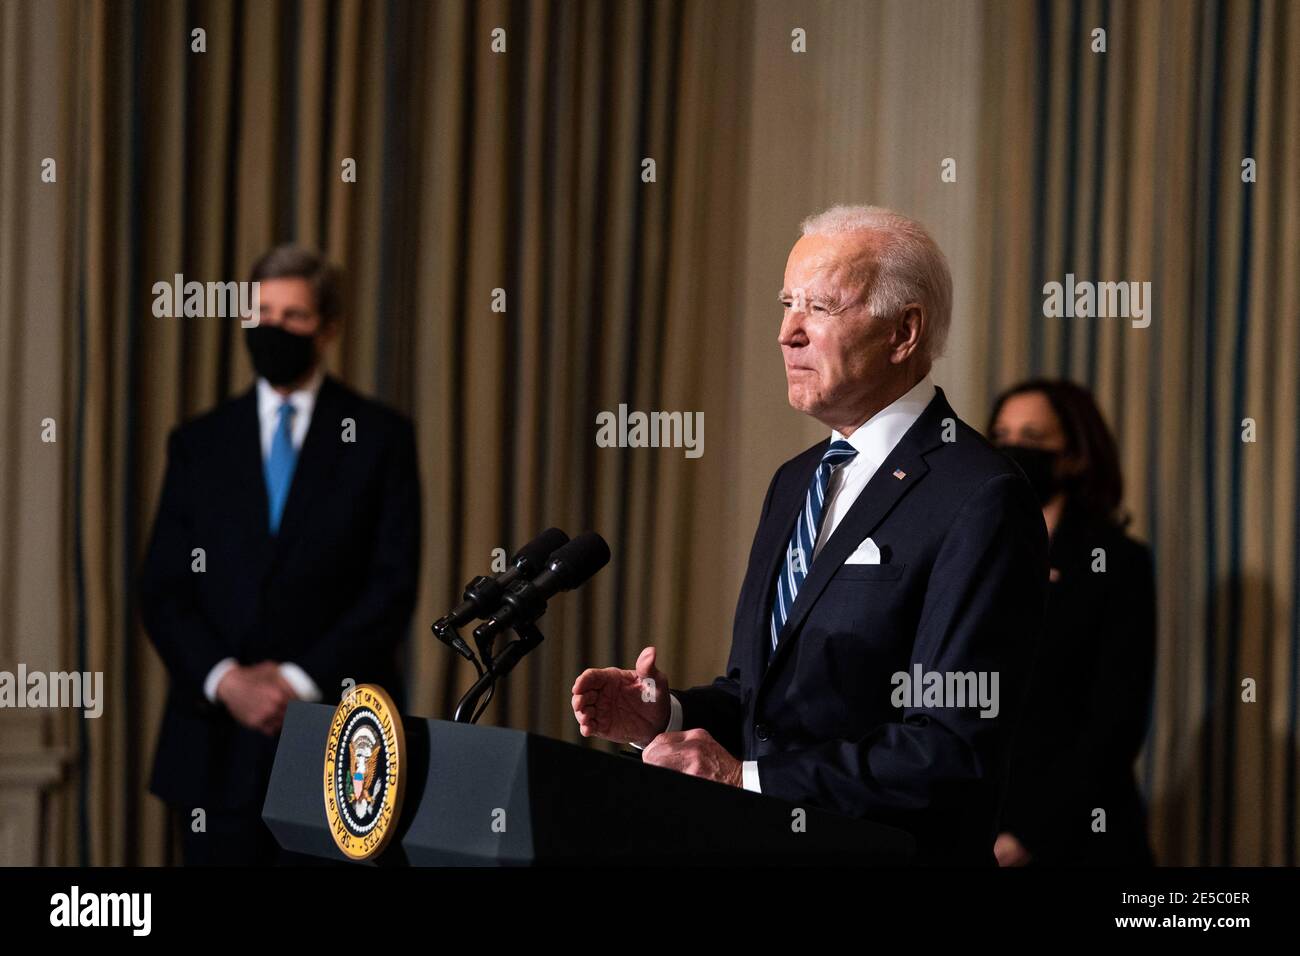 President Joe Biden delivers remarks on his administrationâÂ€Â™s response to climate change at an event in the State Dining Room of the White House in Washington DC, January 27th, 2021. (Anna Moneymaker/NYT) Stock Photo